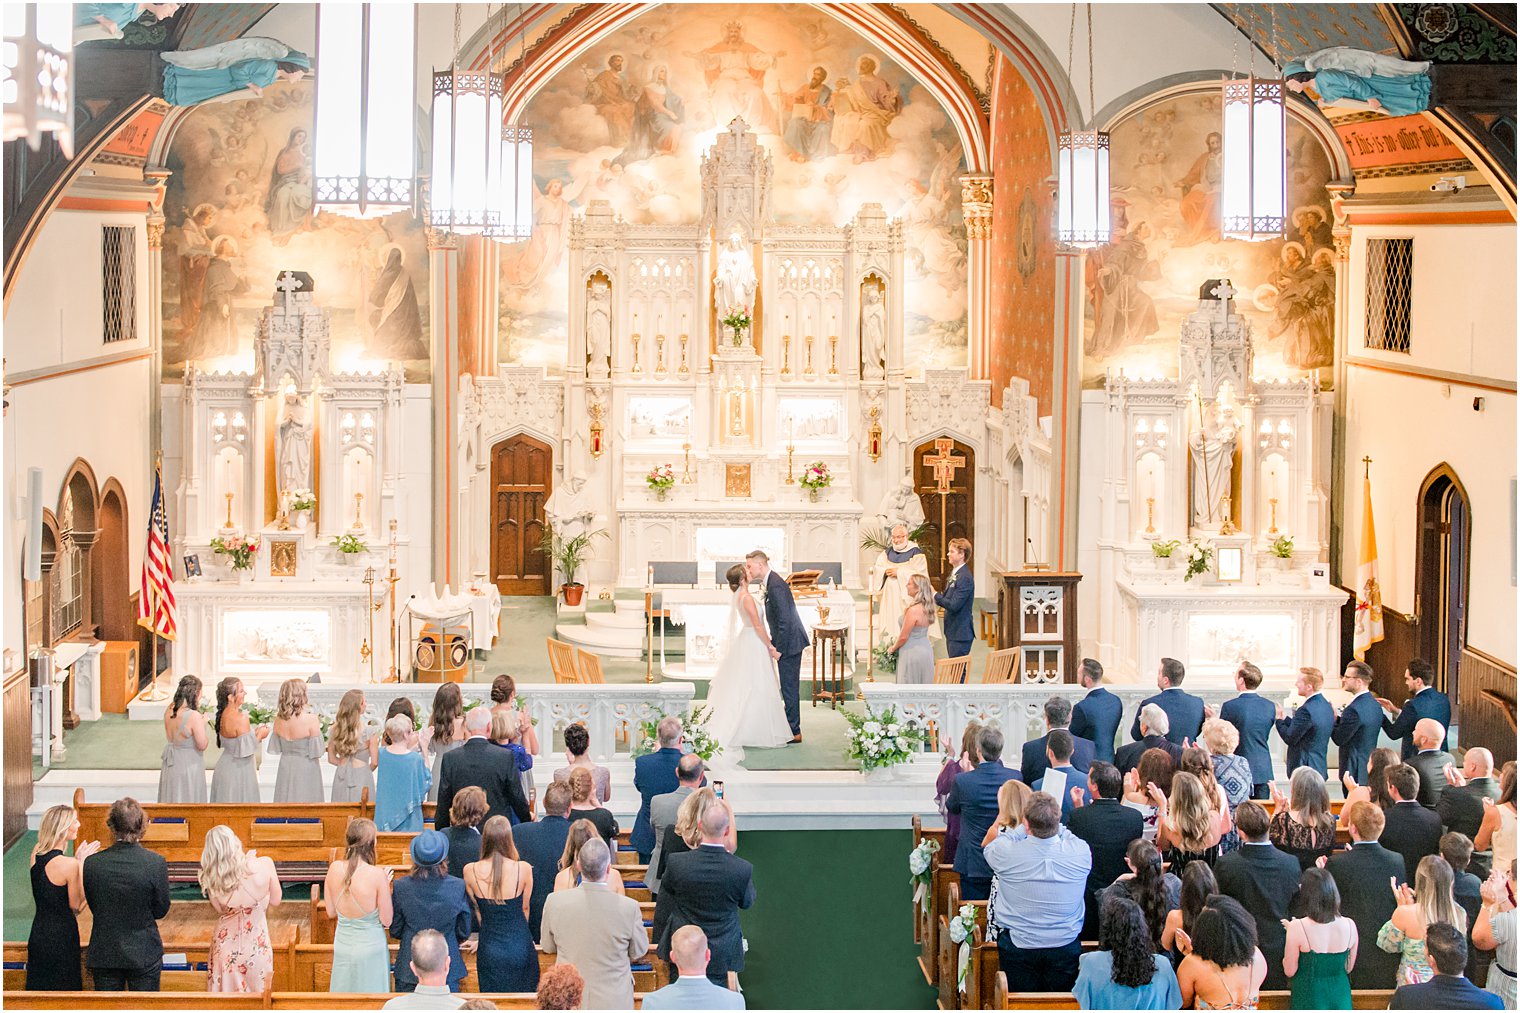 newlyweds kiss at alter during traditional church wedding ceremony at St. Peter's Church